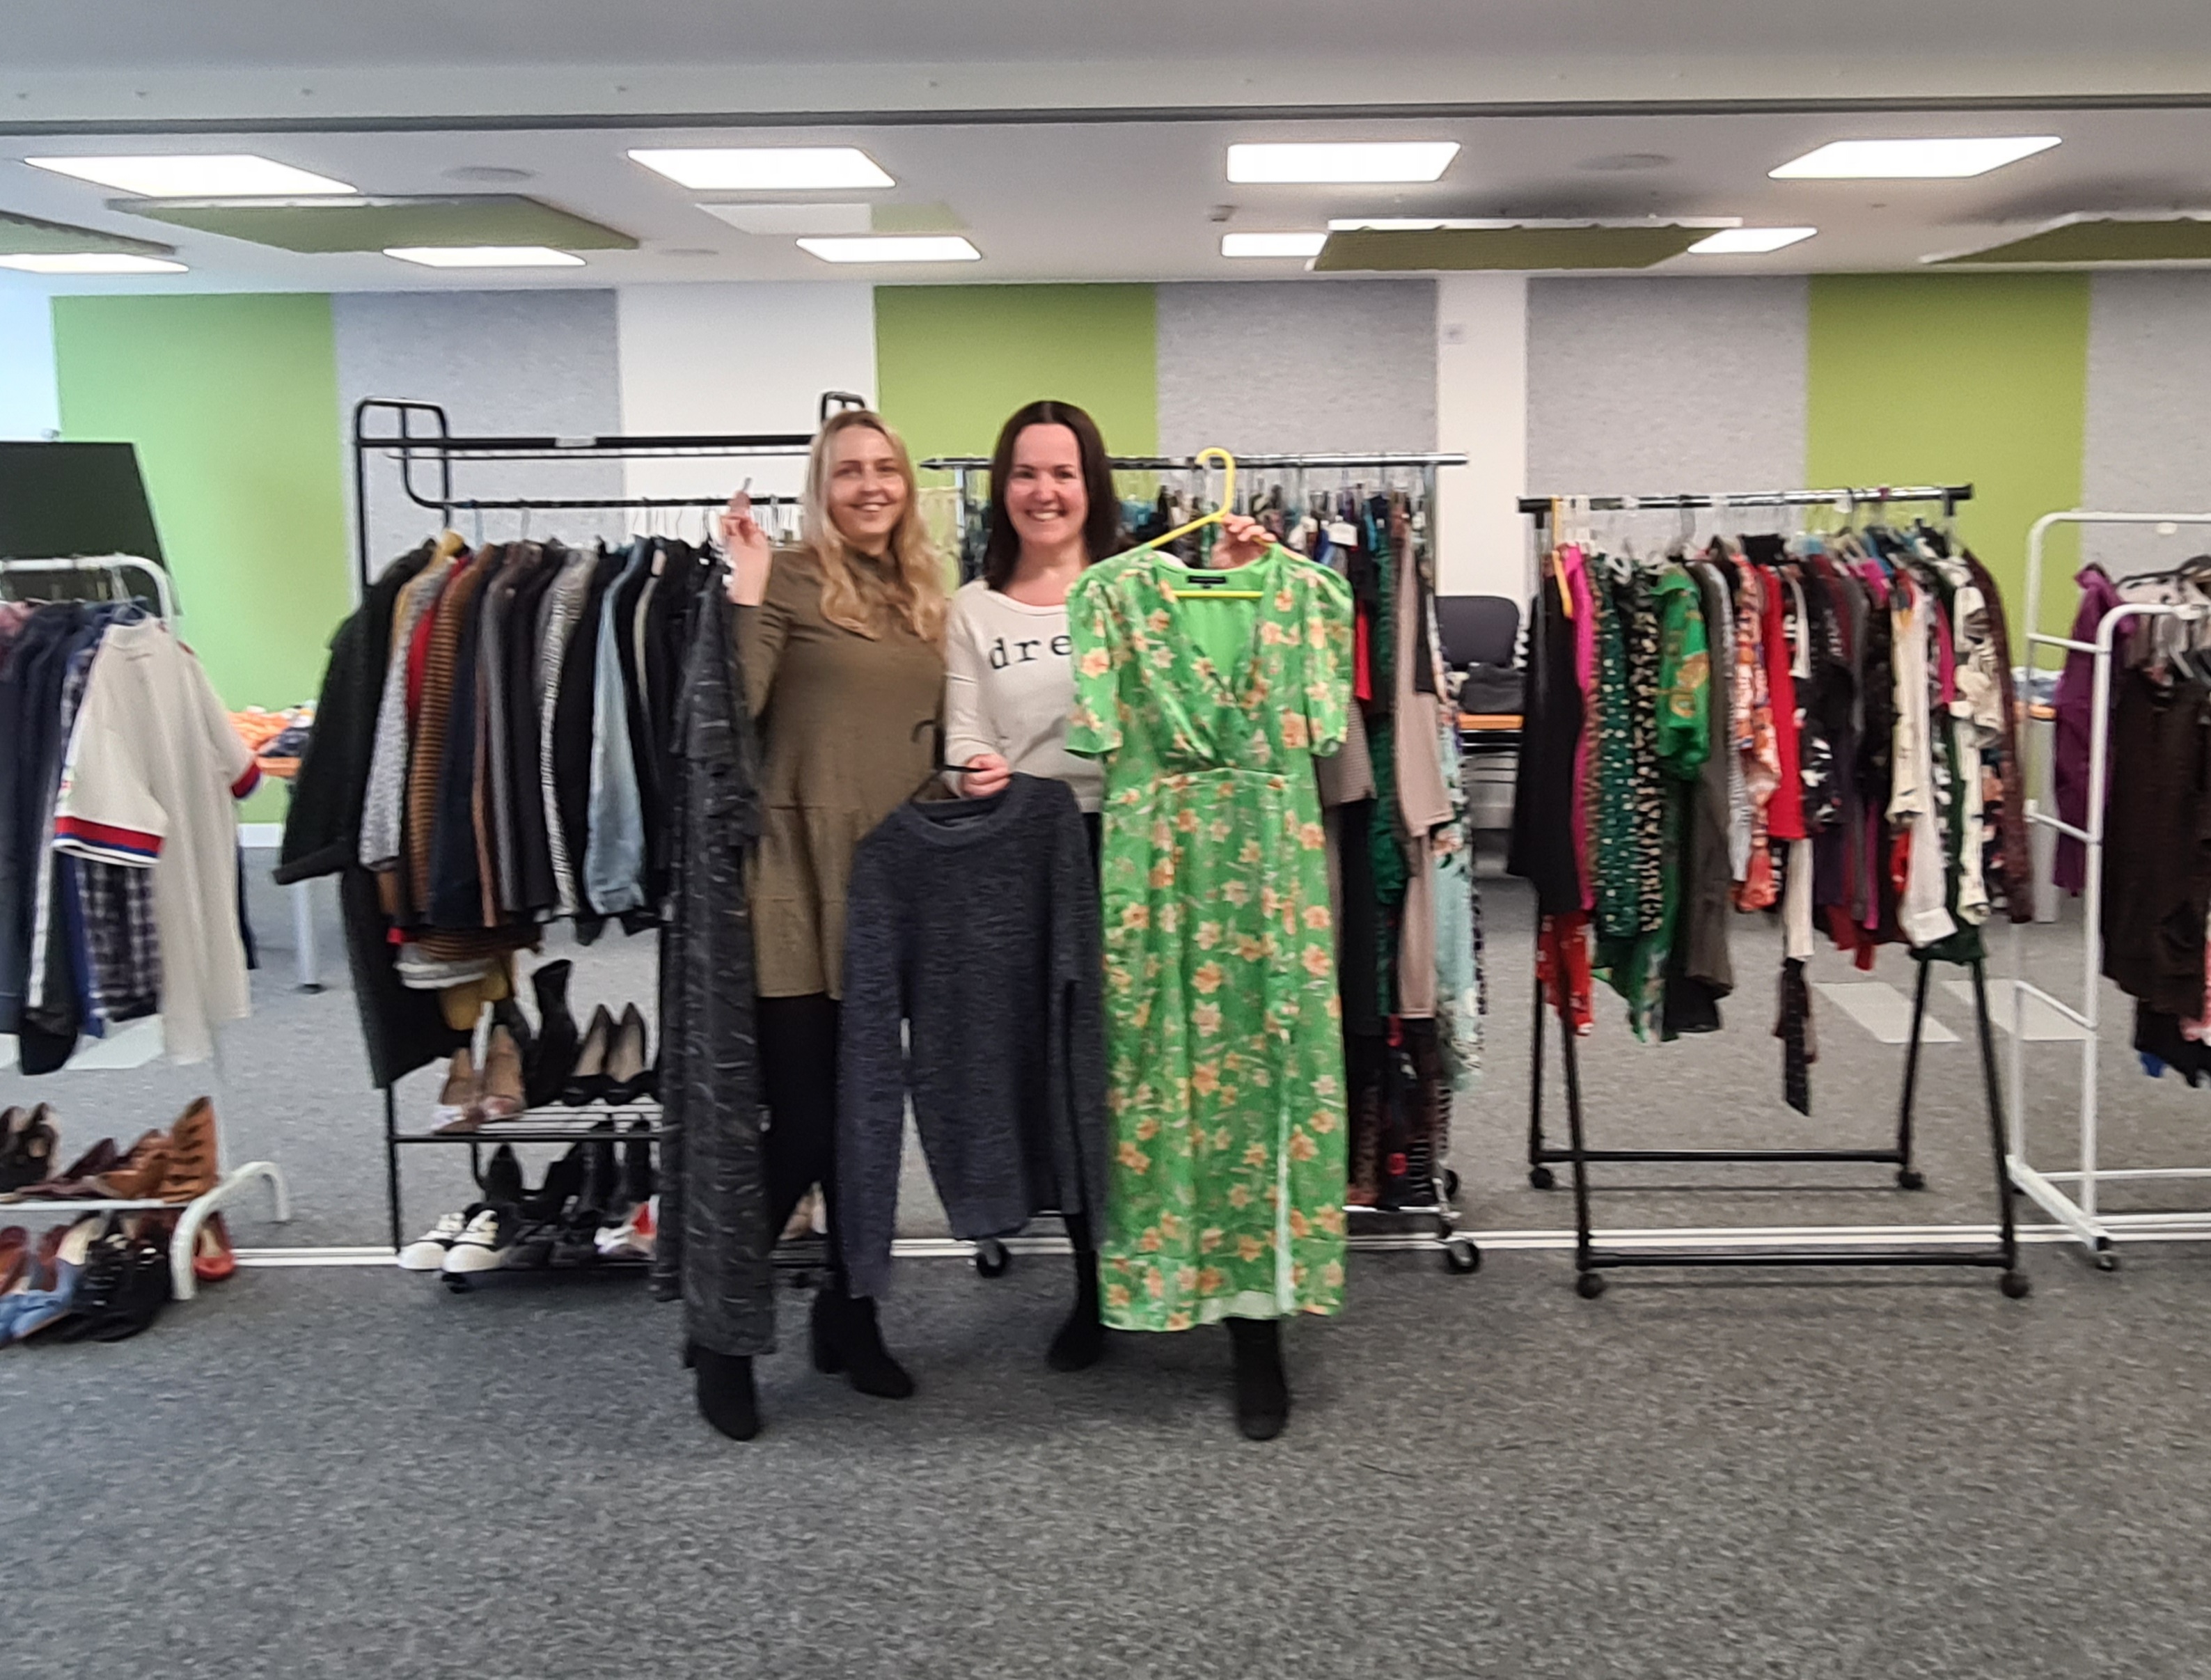 Image of Chloe Dunderdale and Sarah Le Gresley at the JE clothes swap. Behind them are rails packed full of donated clothes